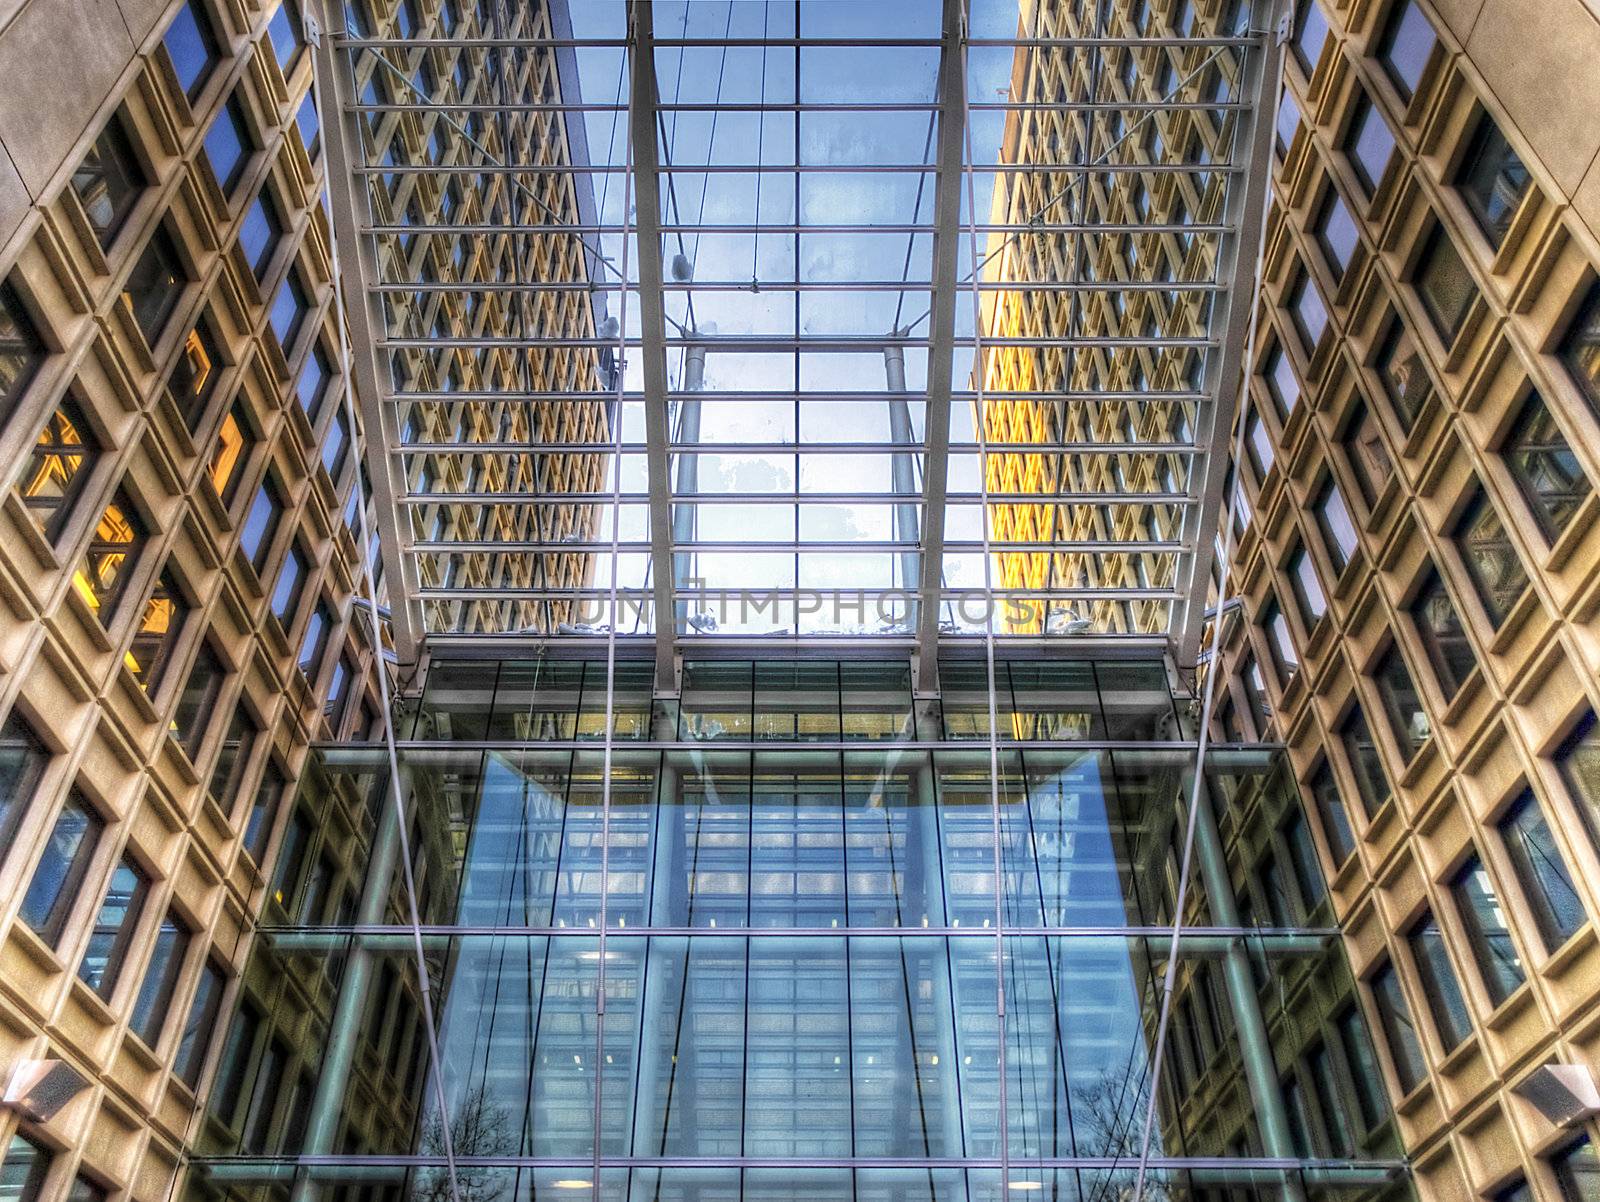 Grid of Glass and Steel by watamyr